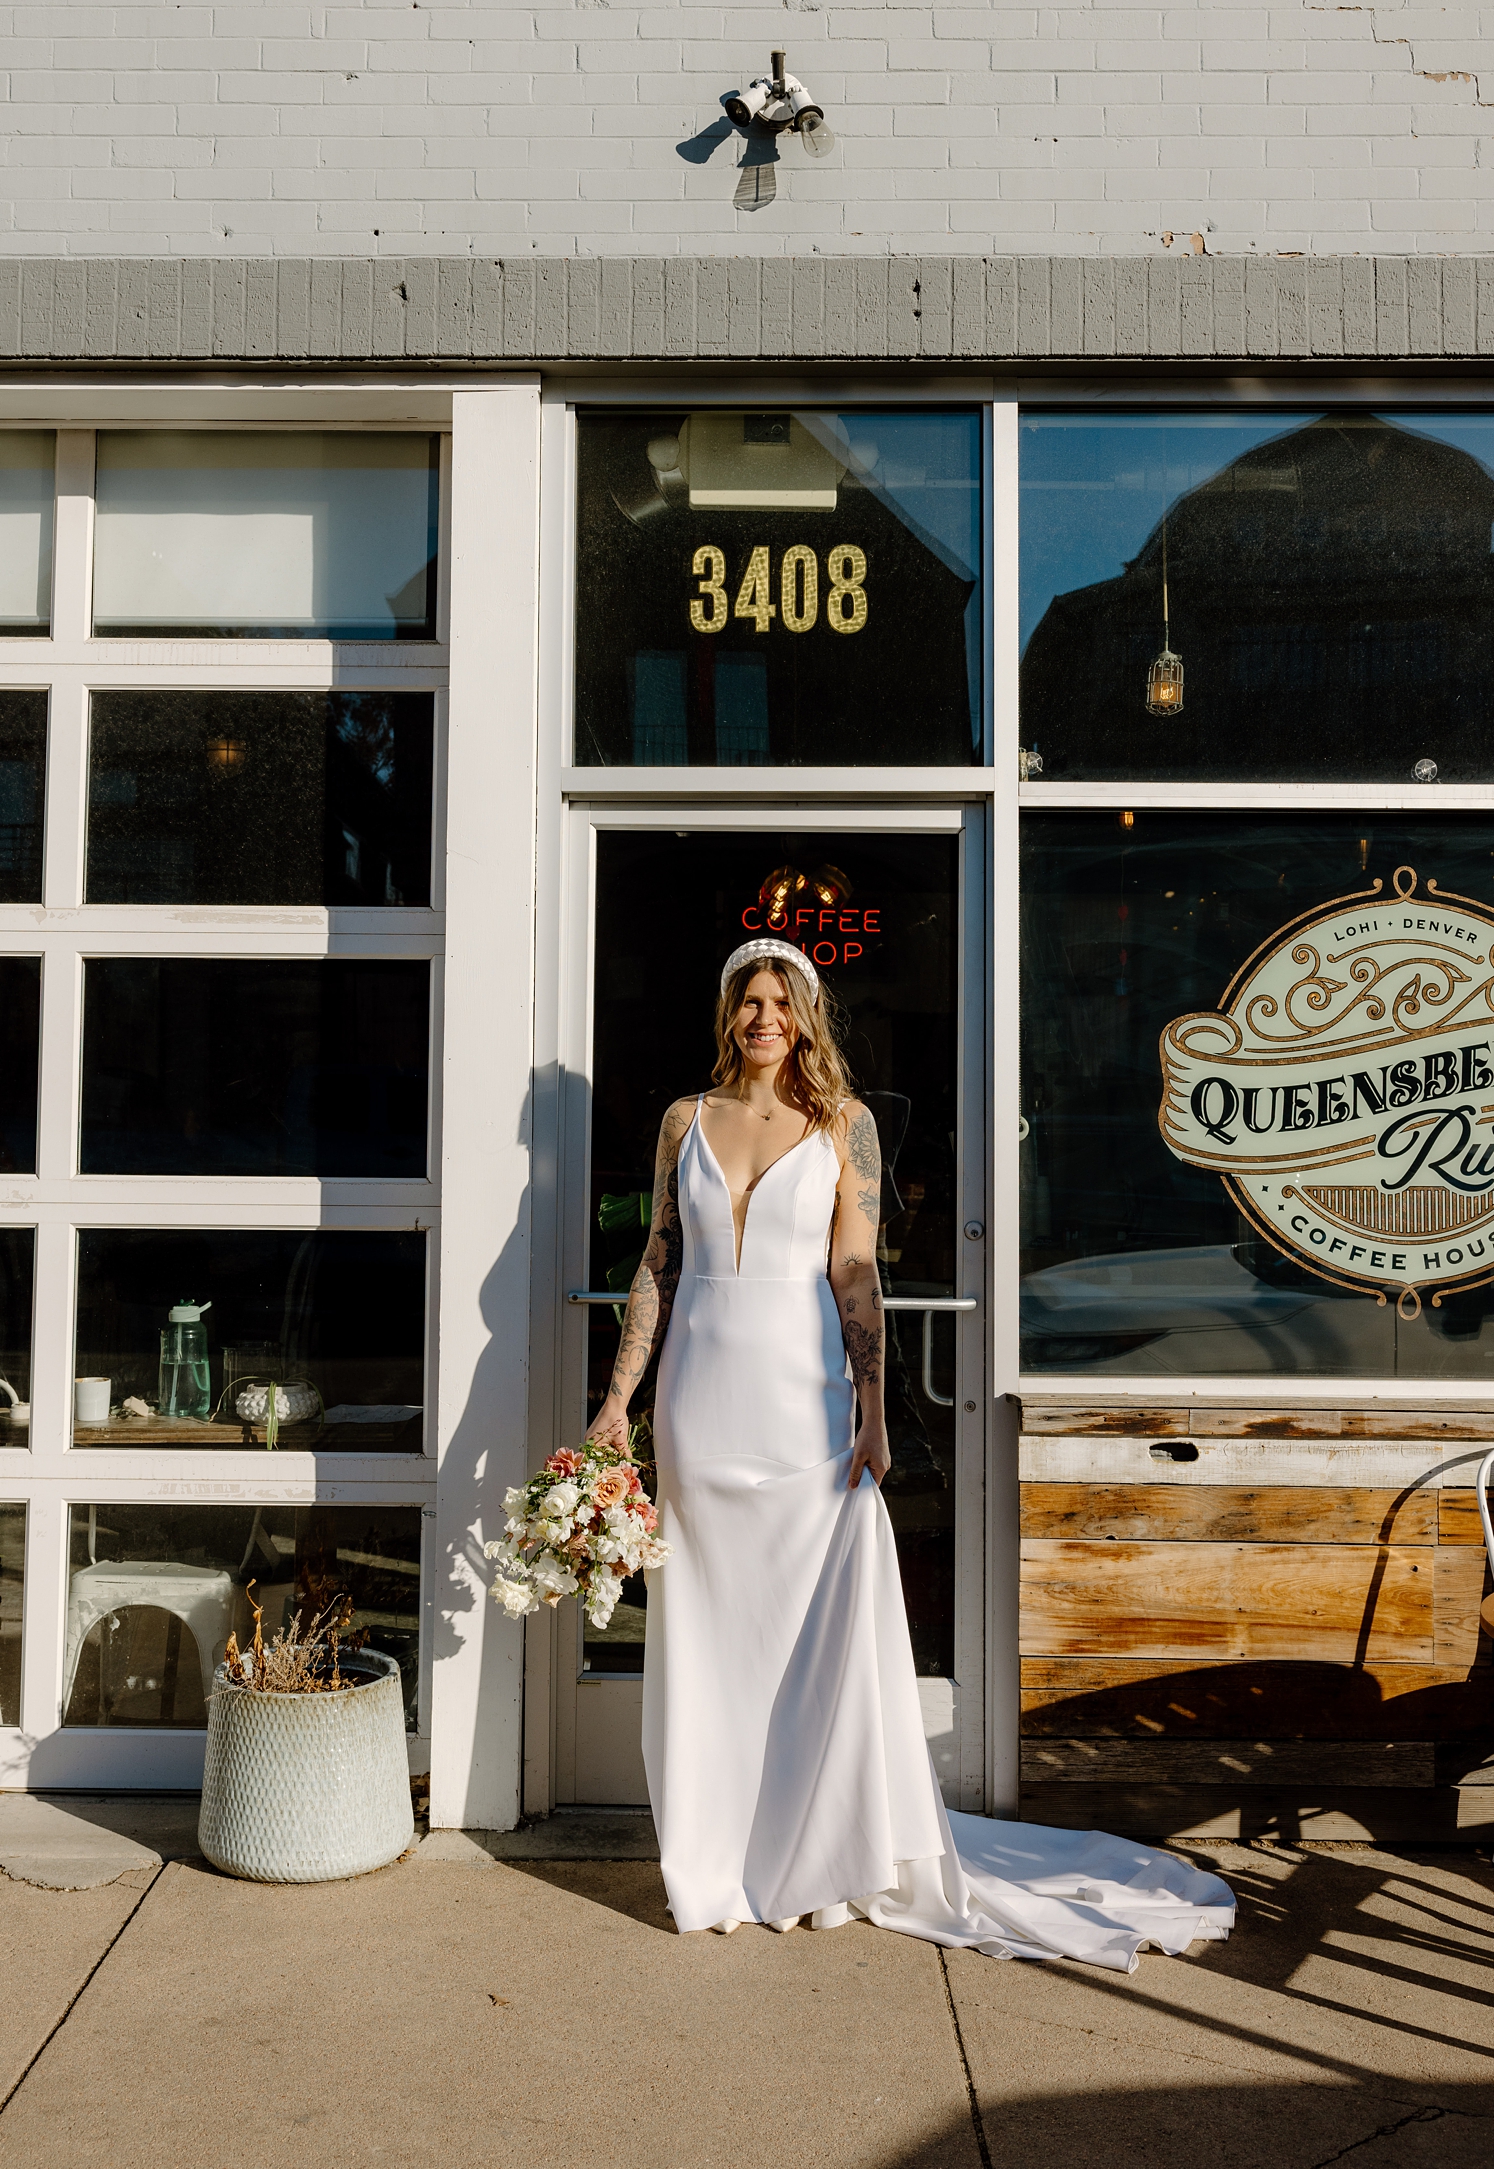 Bride holding bouquet standing in front of Queensbury Rules Coffee House | McArthur Weddings and Events